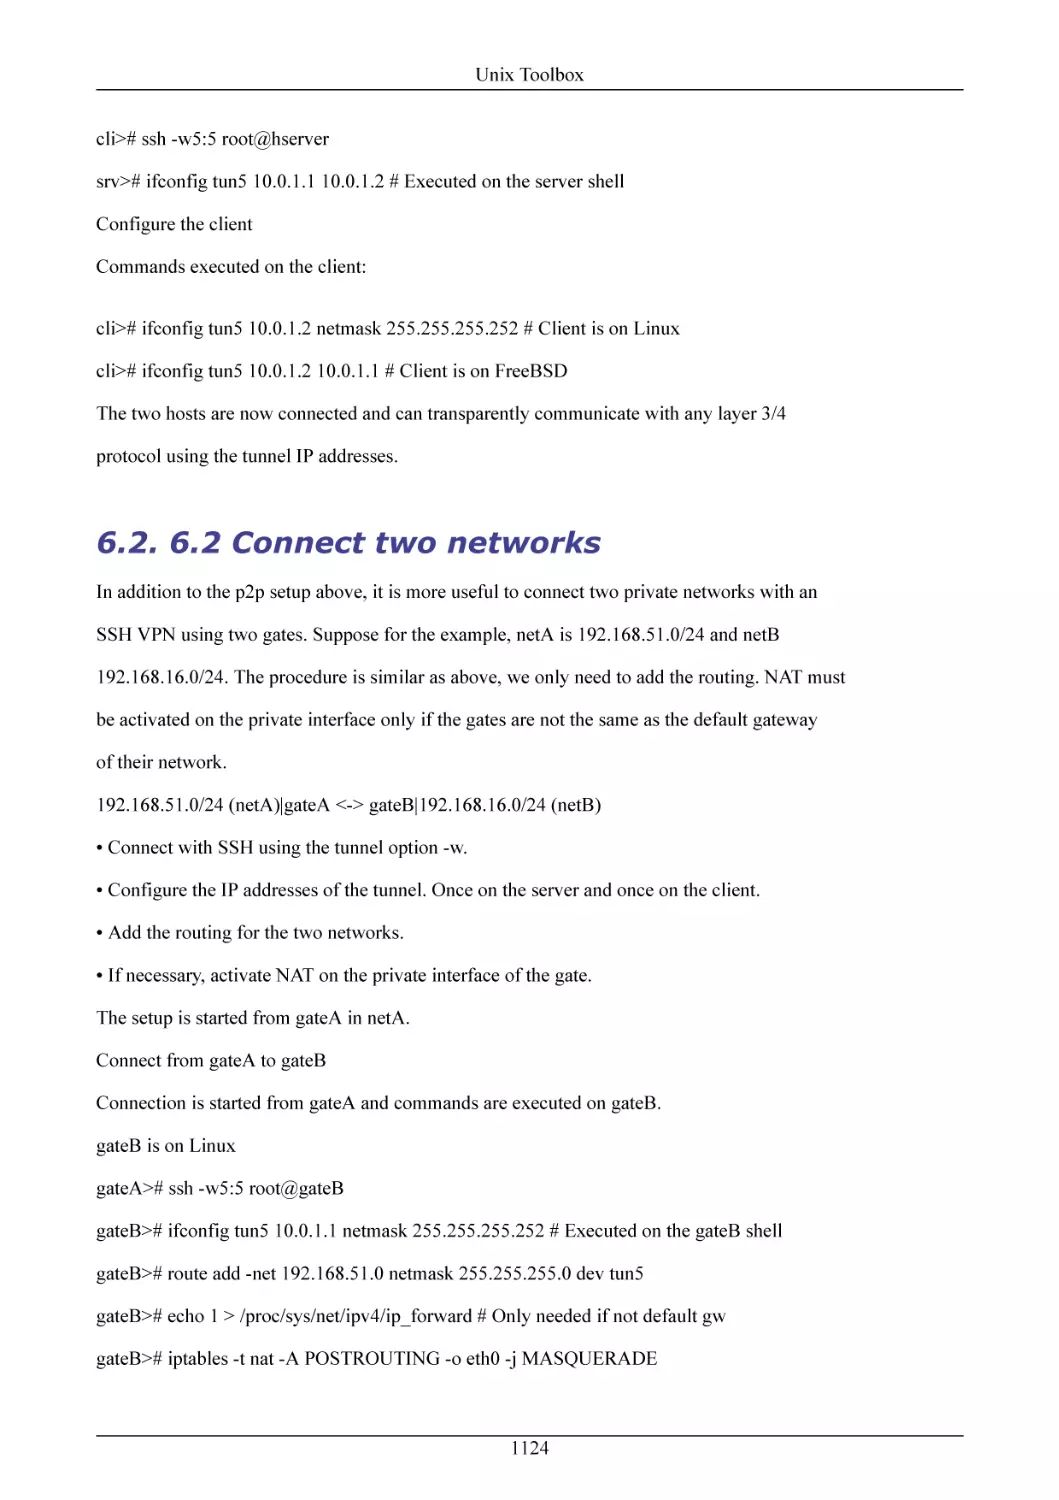 6.2 Connect two networks